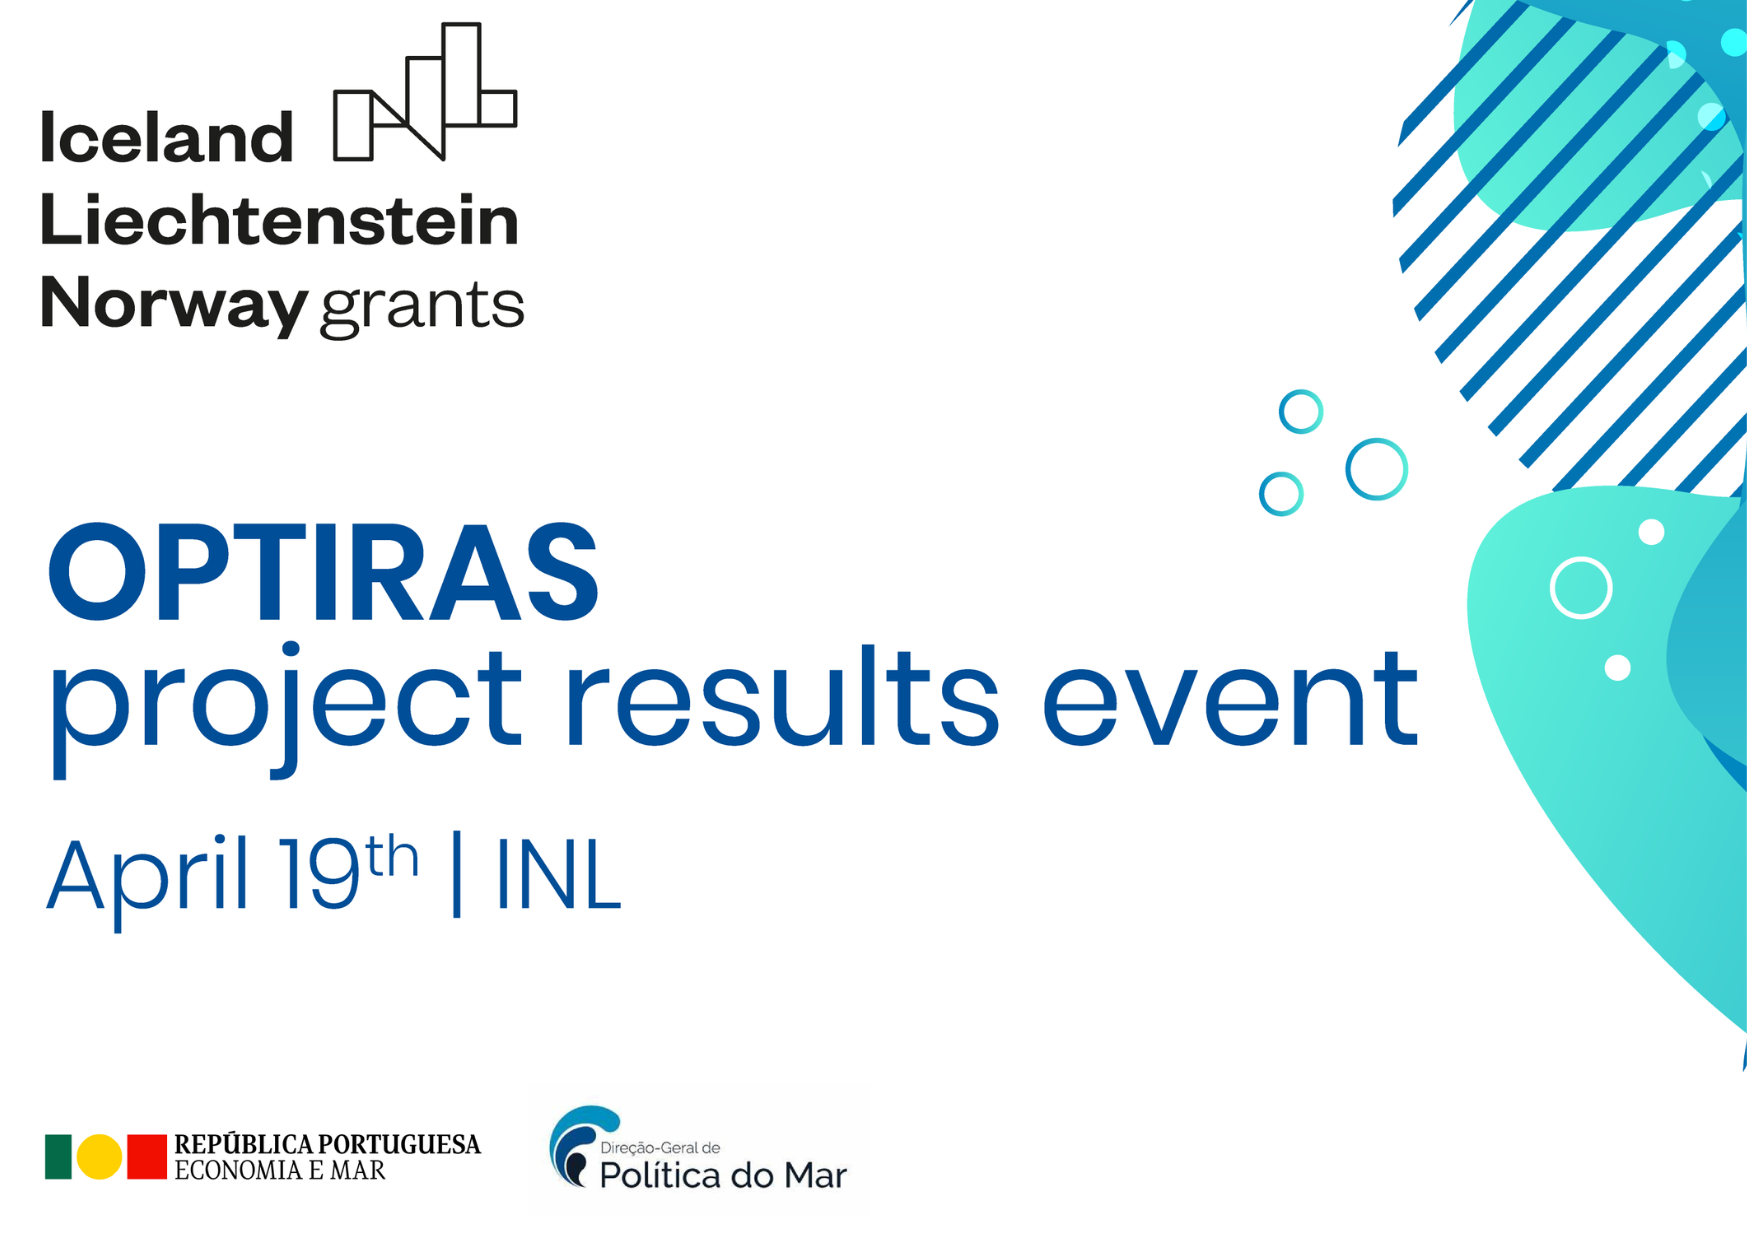 Mark Your Calendar: Optiras Project Results Event on April 19th